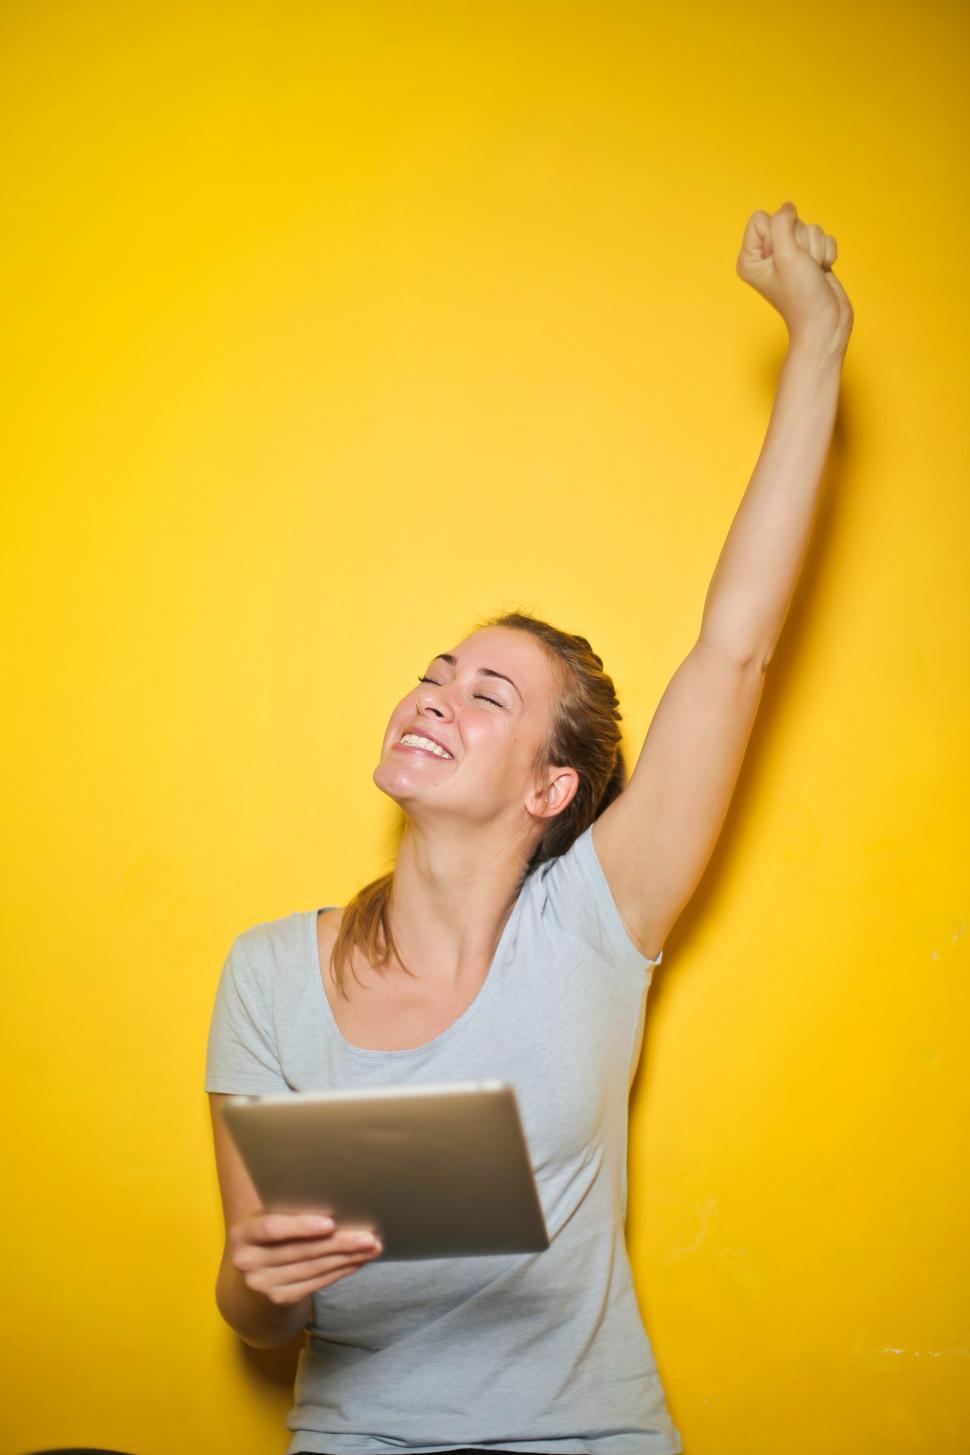 Free Image of Young Woman Holding An iPad With One Hand Up Against Yellow Wall 